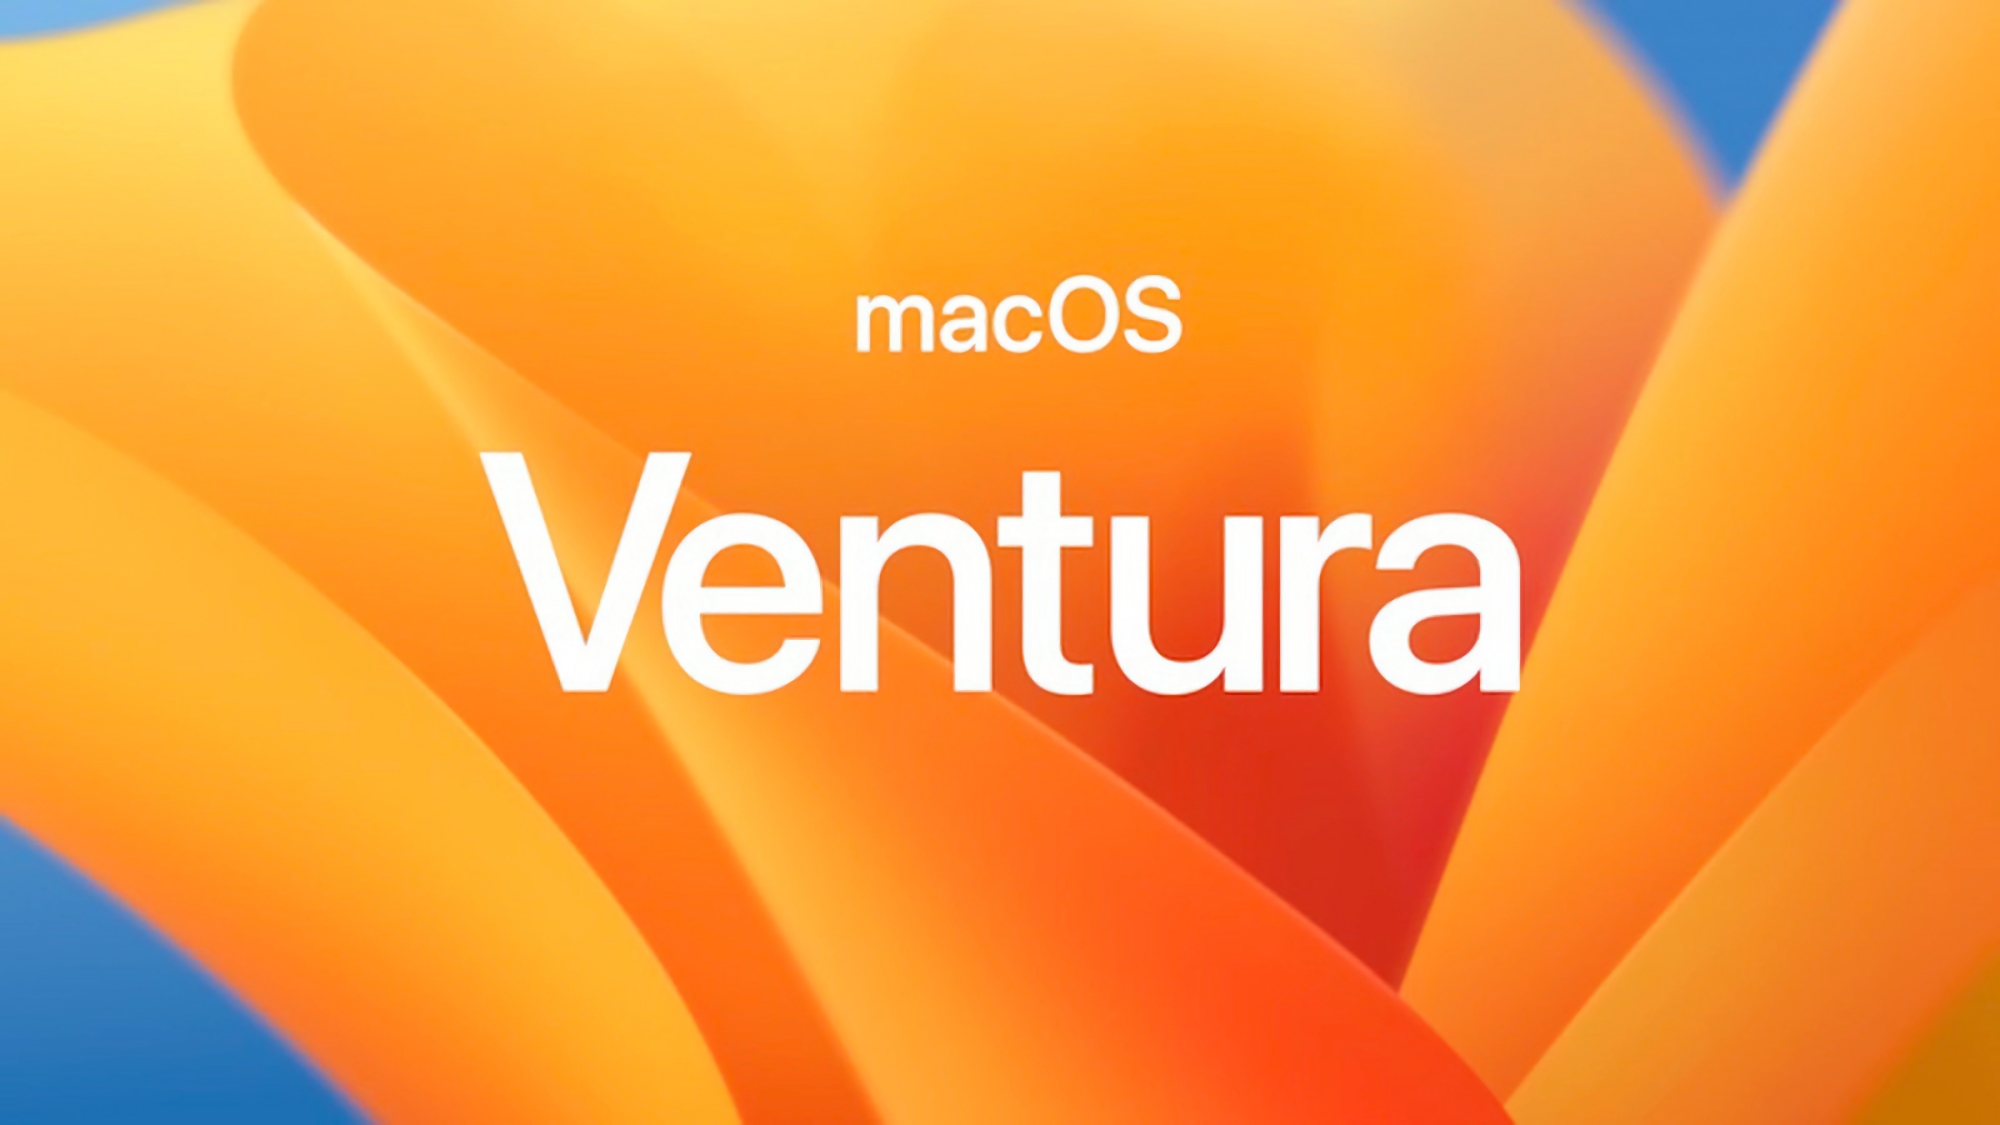 Apple has released the first beta version of macOS Ventura 13.1: here's what's new